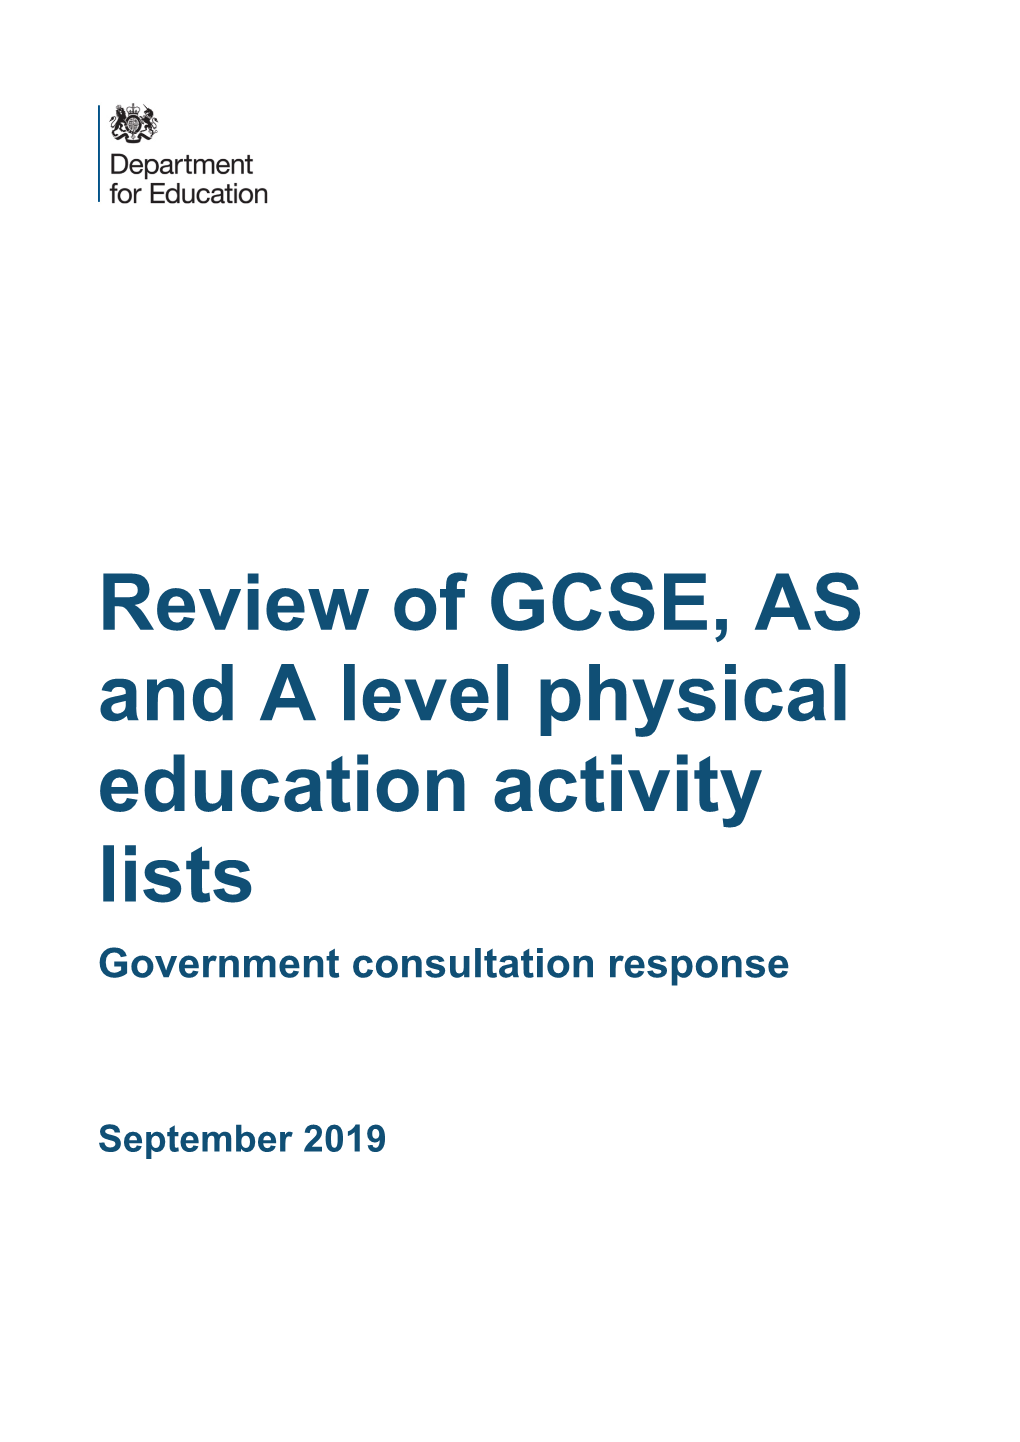 Review of GCSE, AS and a Level Physical Education Activity Lists Government Consultation Response